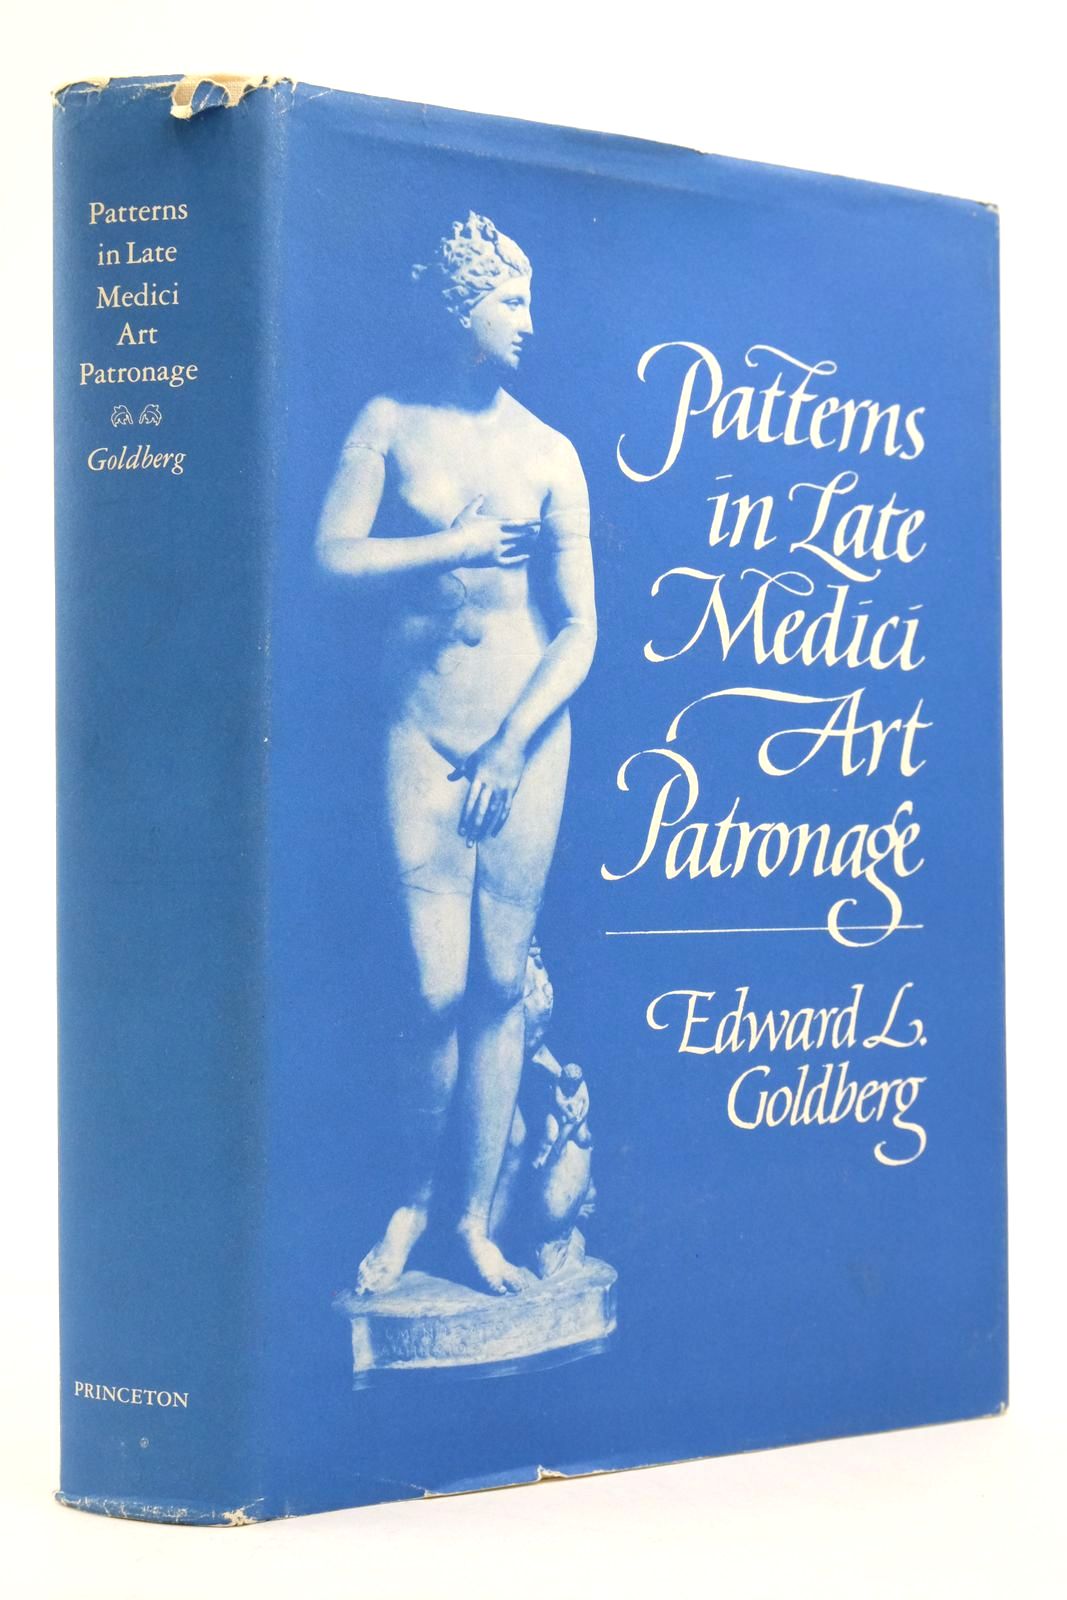 Photo of PATTERNS IN LATE MEDICI ART PATRONAGE written by Goldberg, Edward L. published by Princeton University Press (STOCK CODE: 2138950)  for sale by Stella & Rose's Books